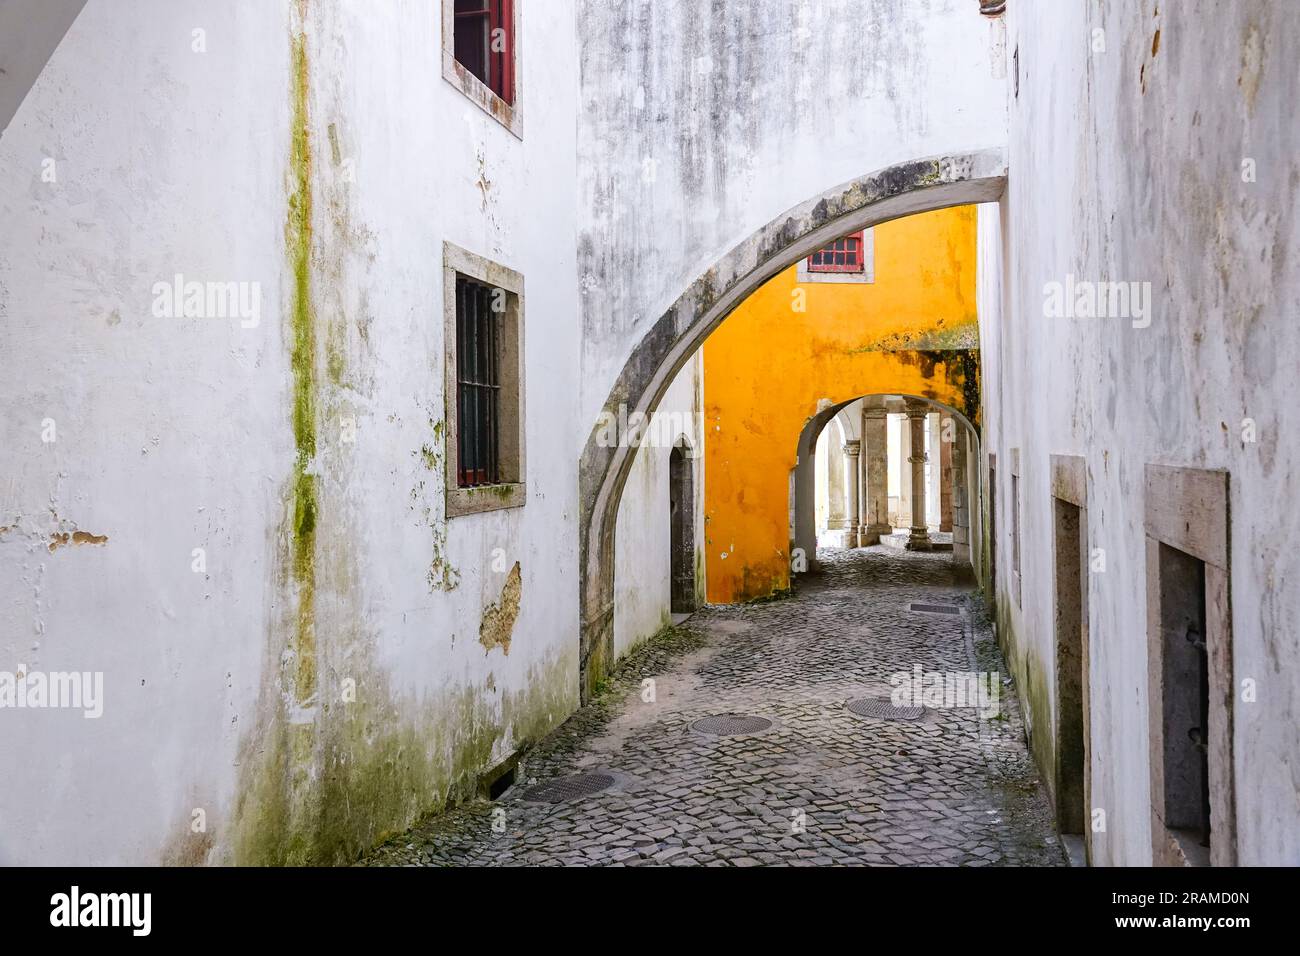 The carriage entrance under the historic Sintra National Palace or in Palácio Nacional de Sintra in Sintra, Portugal. The Romanticist architectural and fairytale palaces draws tourists from around the world. Stock Photo